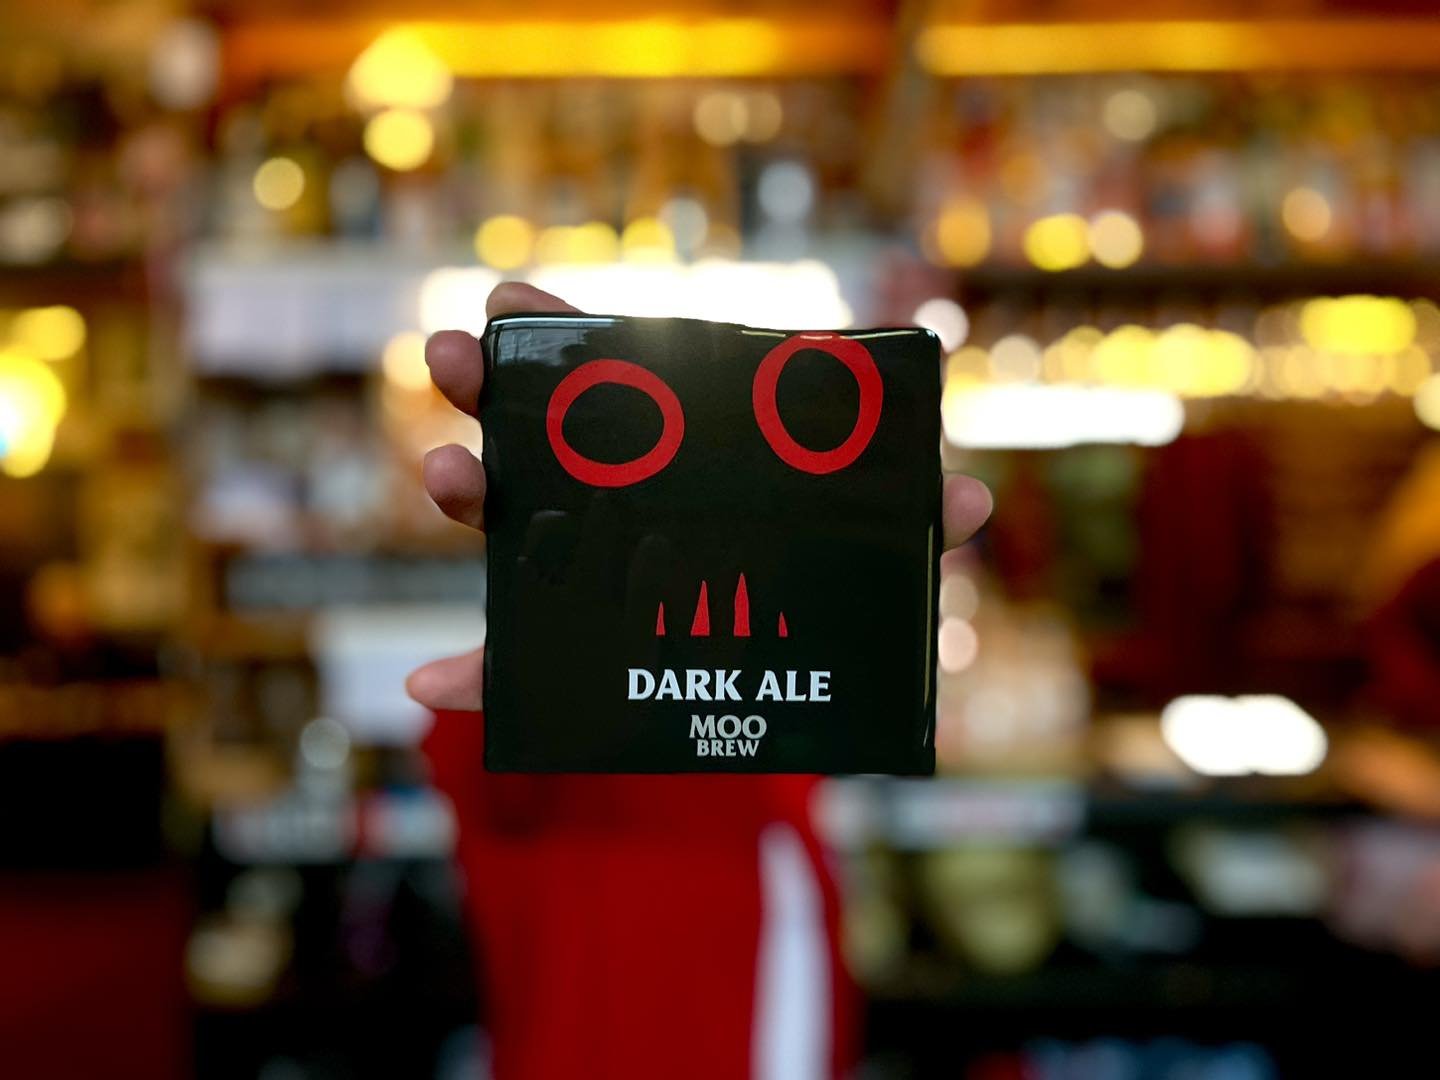 A perfect choice for a cosy night at the pub or a crisp afternoon in the beer garden 🍺

This Moo Brew dark ale is a delish choice for the colder months!